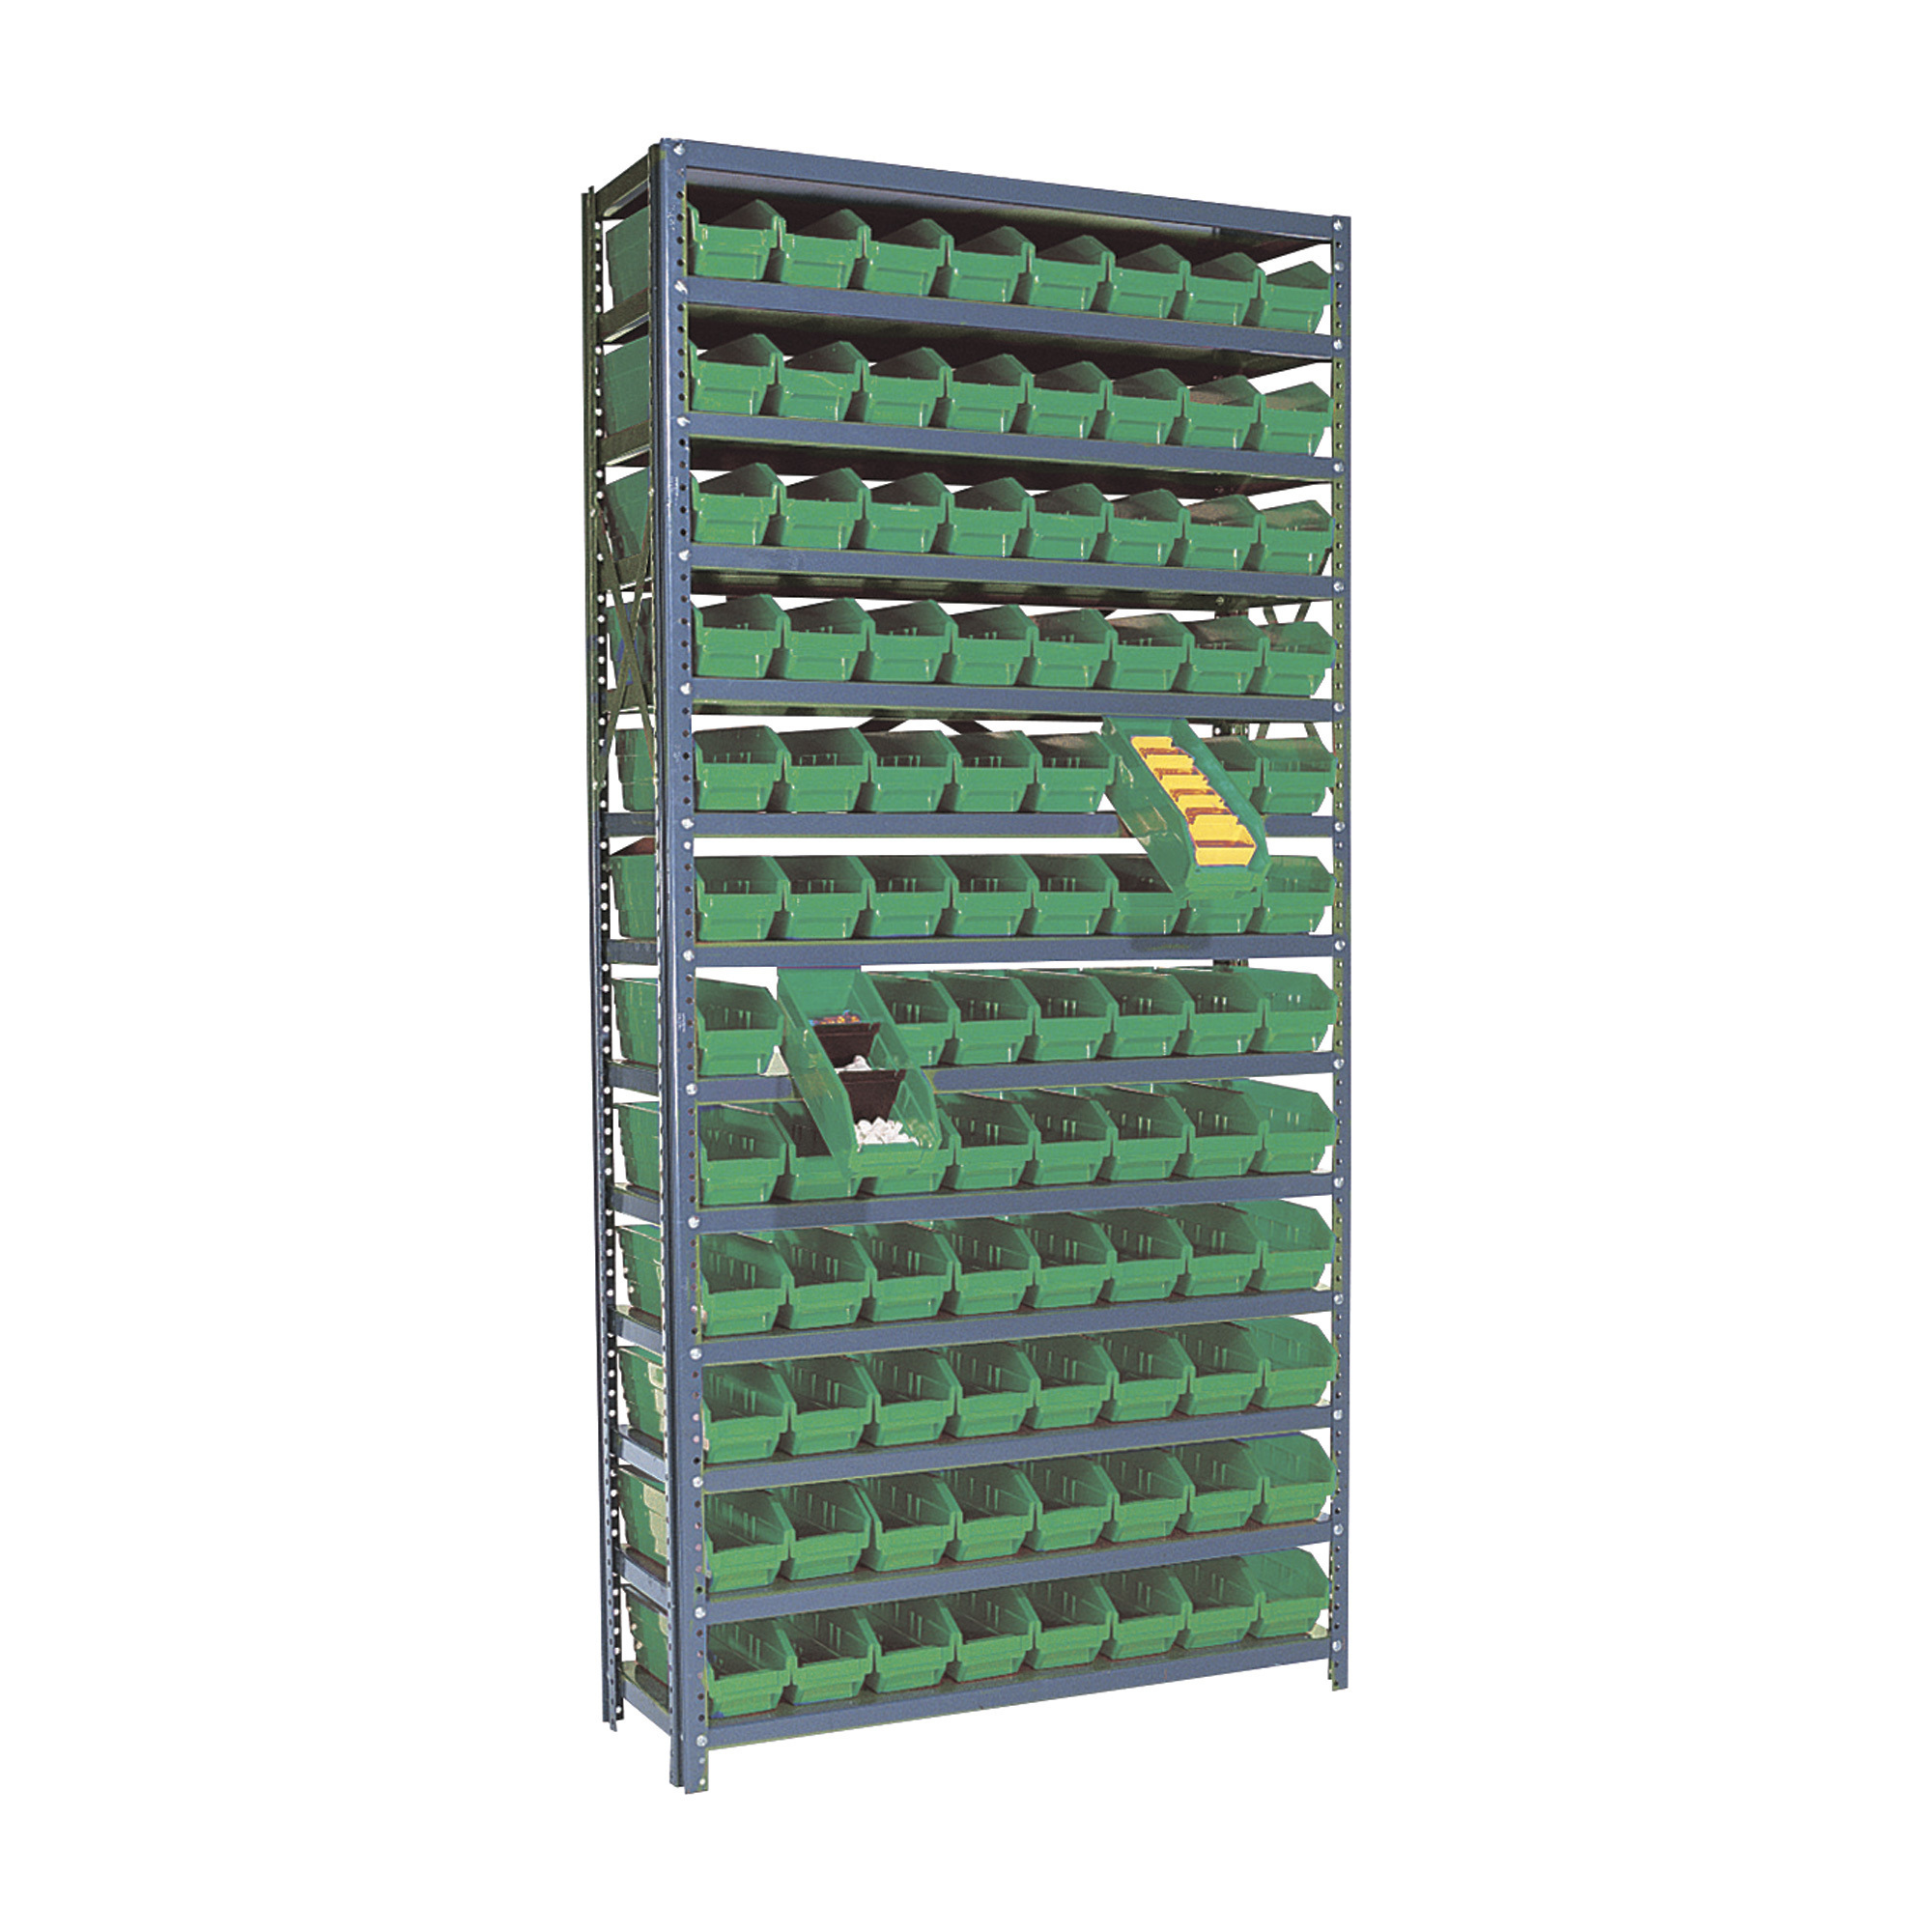 Quantum Storage Single Side Metal Shelving Unit With 96 Bins, 12Inch x 36Inch x 75Inch Rack Size, Green, Model 1275-101GN